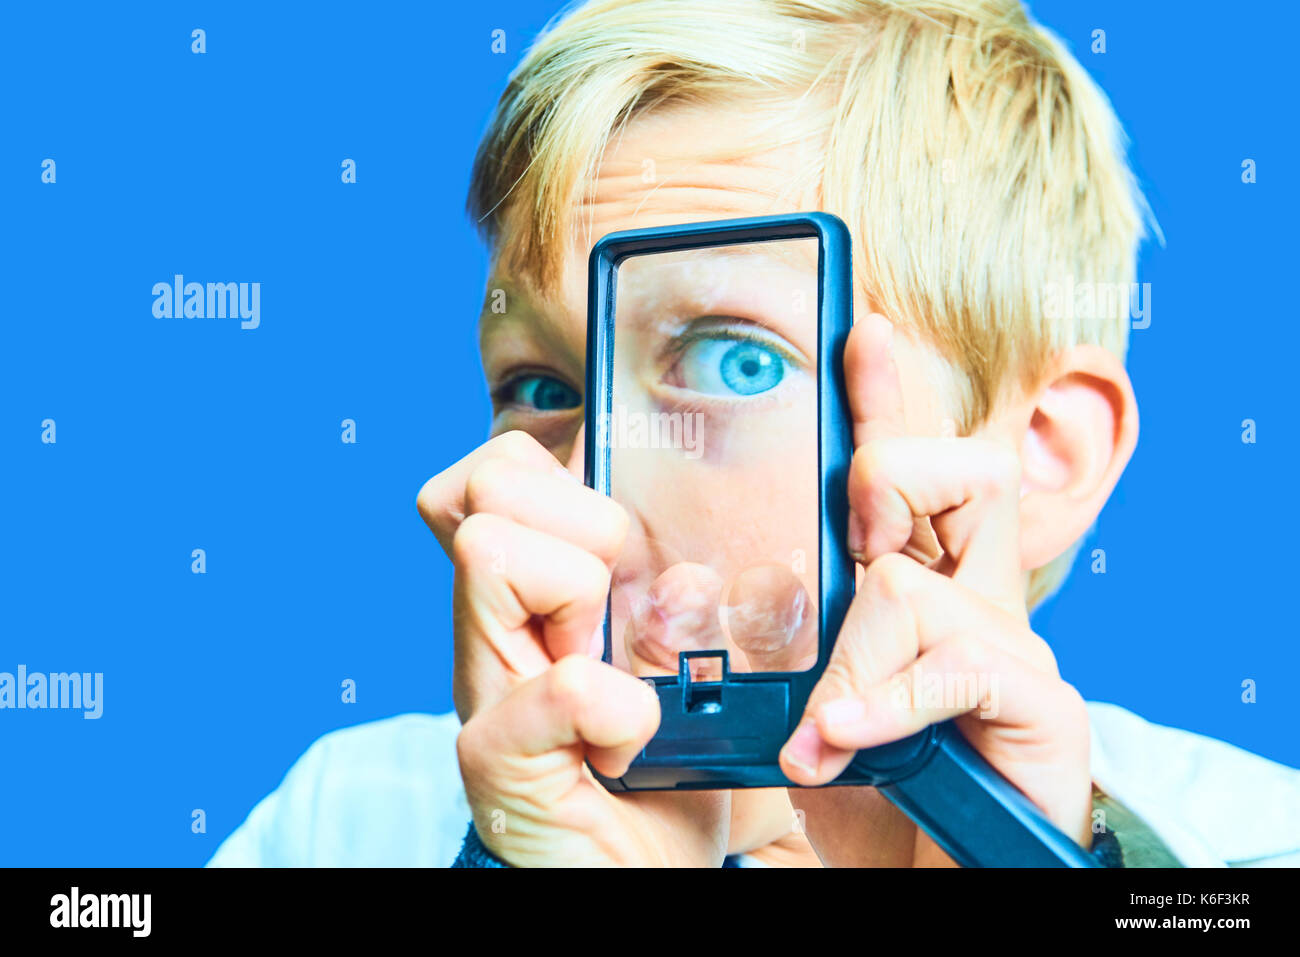 Portrait of Child Young Blond Boy using magnifying glass. Concept of crazy scientist. Isolated on blue keying background. Stock Photo